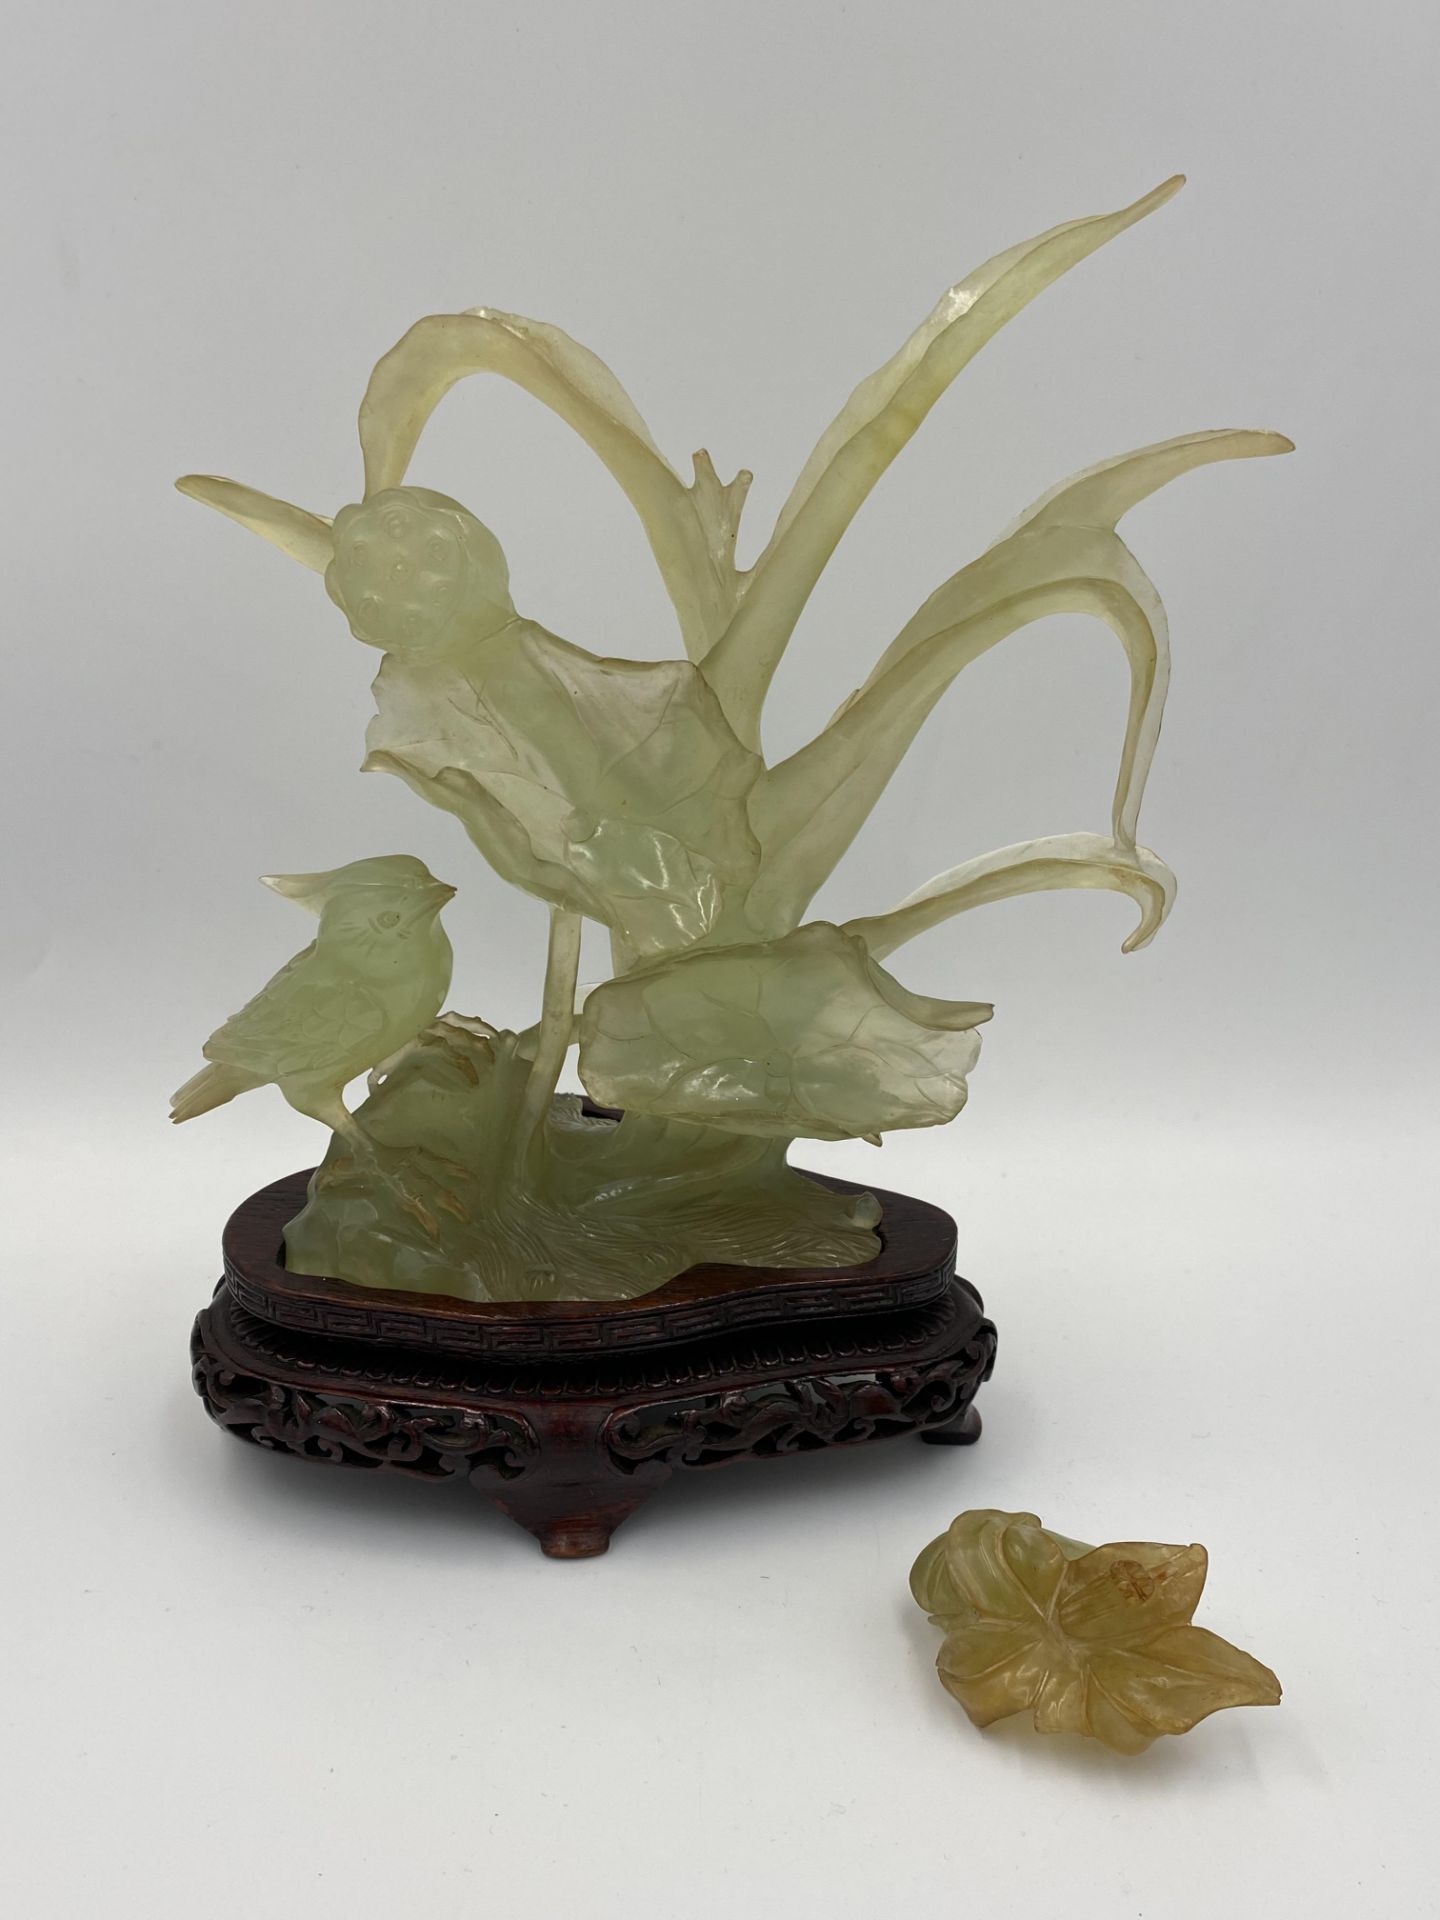 Early 20th century chinese carved jade figure of a bird - Image 9 of 9